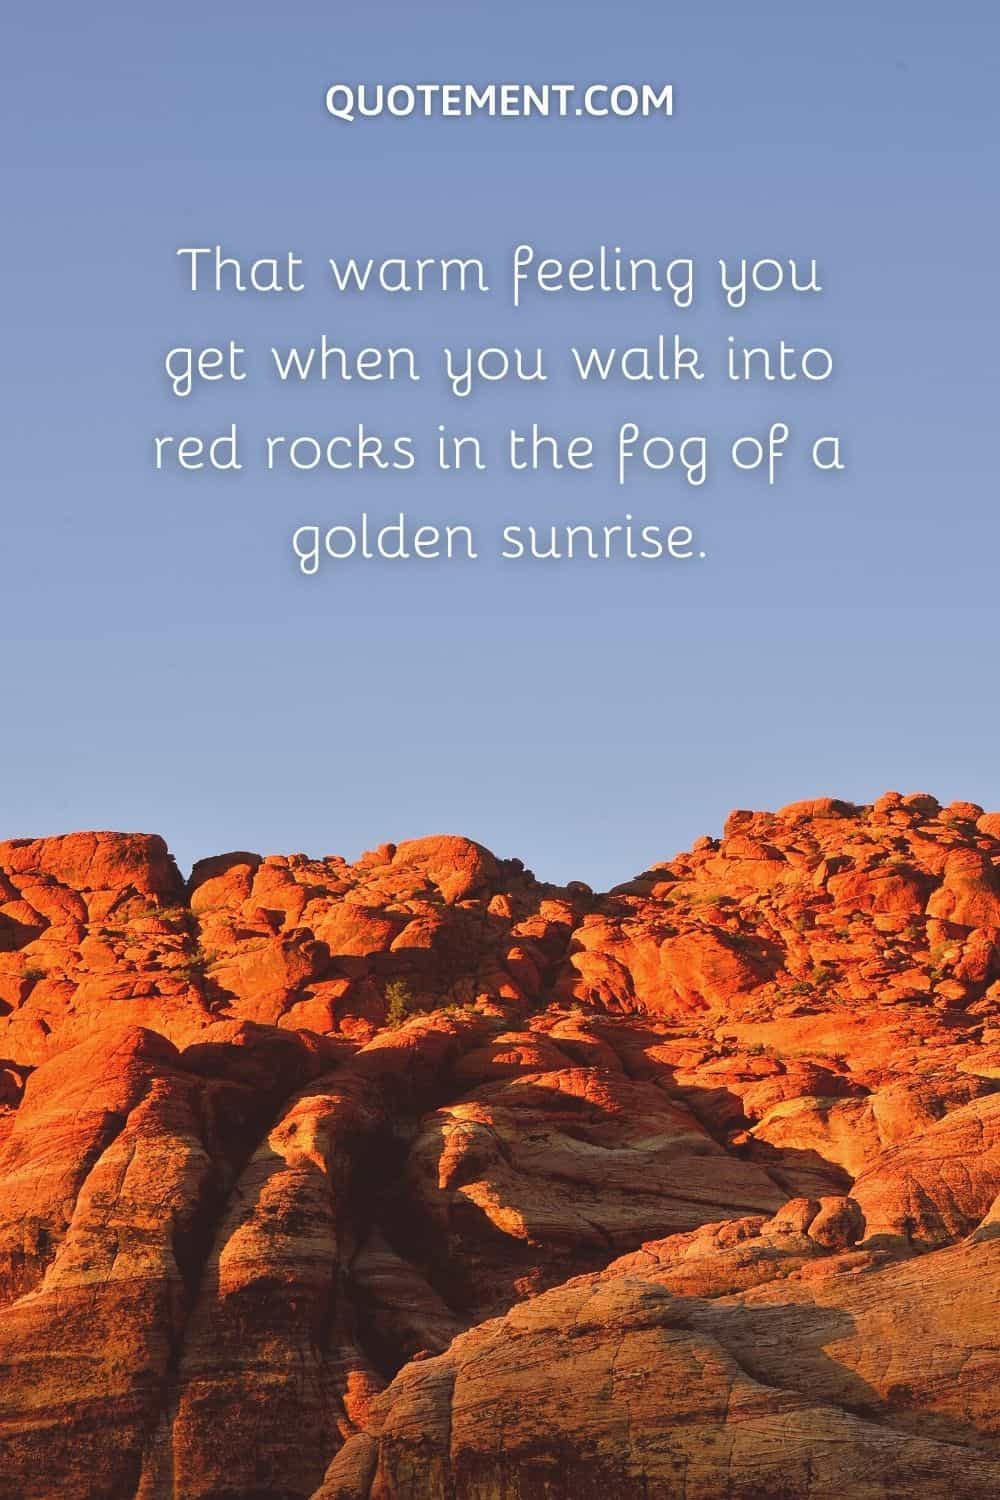 That warm feeling you get when you walk into red rocks in the fog of a golden sunrise.